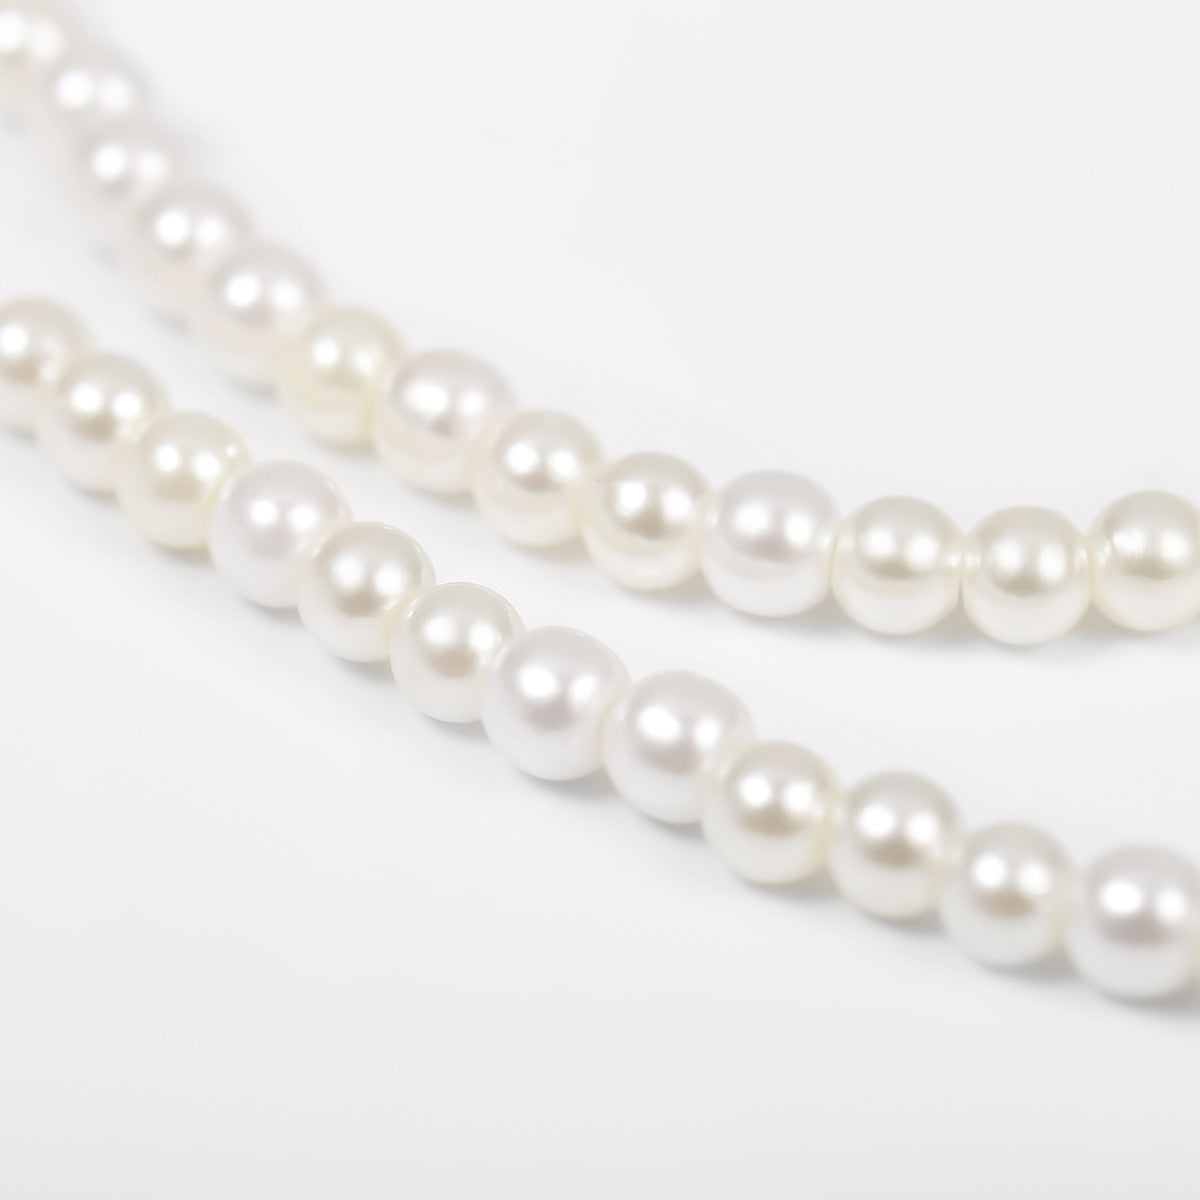 Pearl Geometric Single Layer Necklace